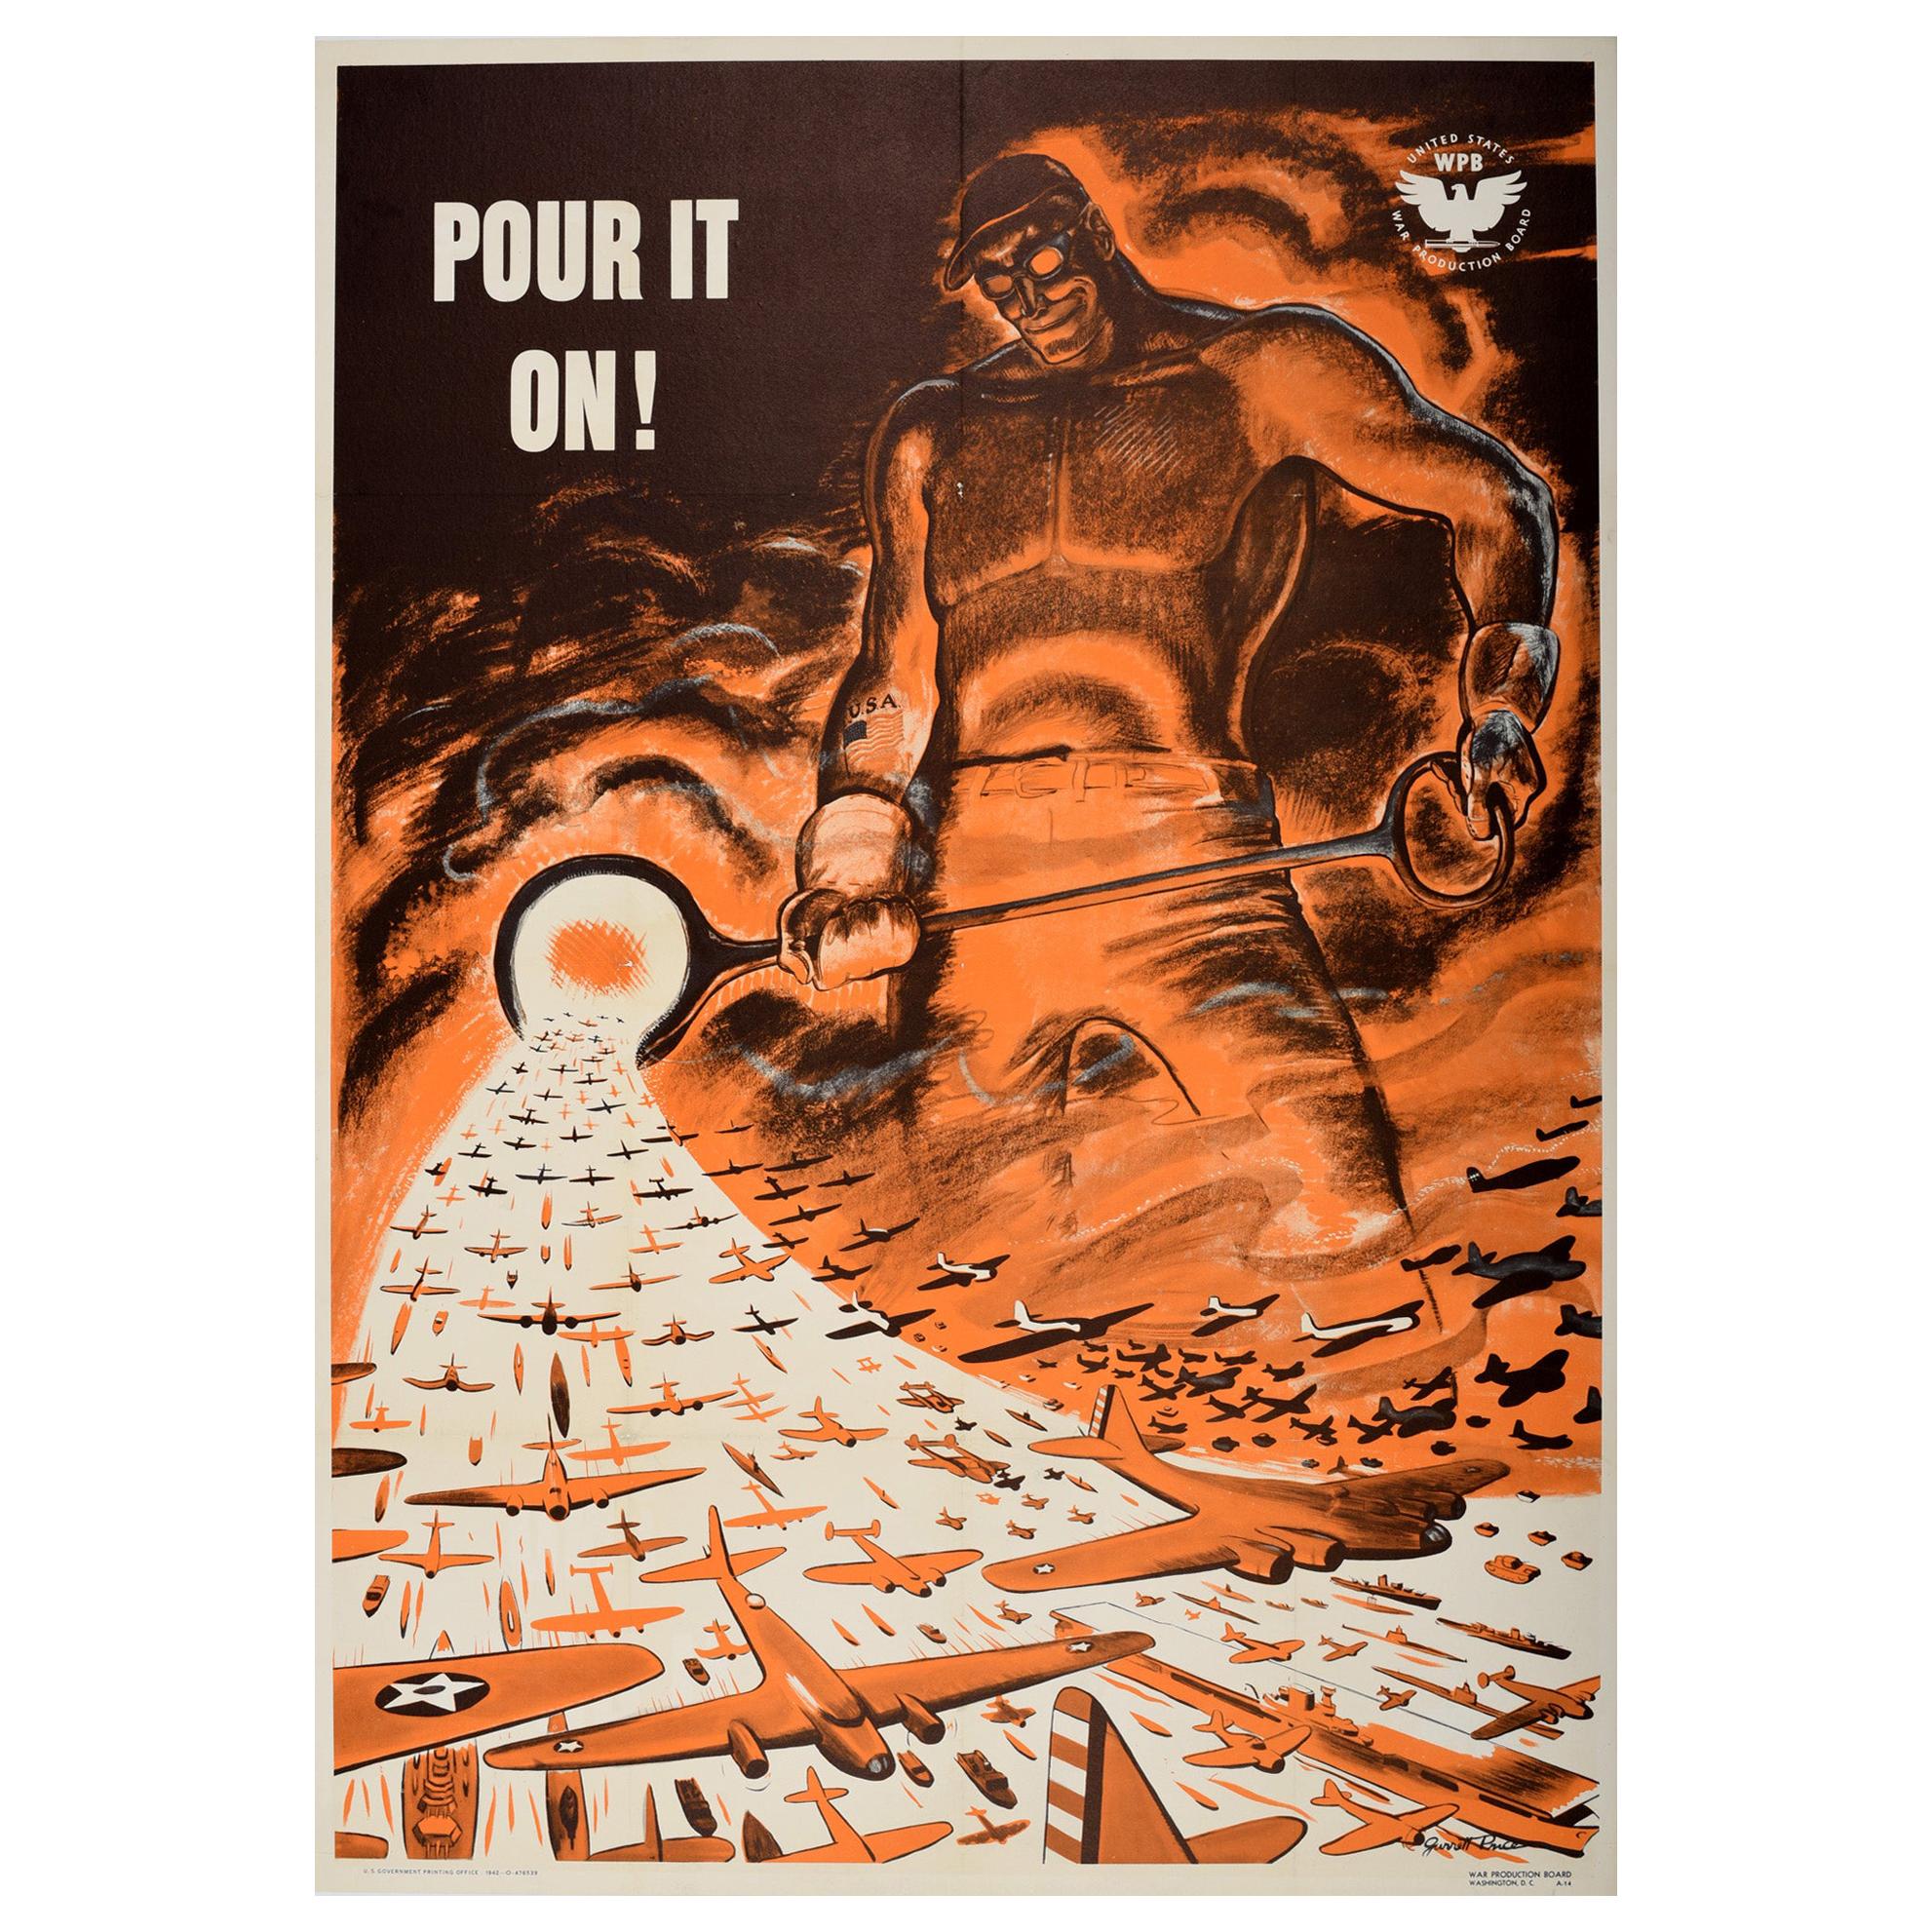 Original Vintage Poster Pour It On WWII Industry Military US War Production WPB